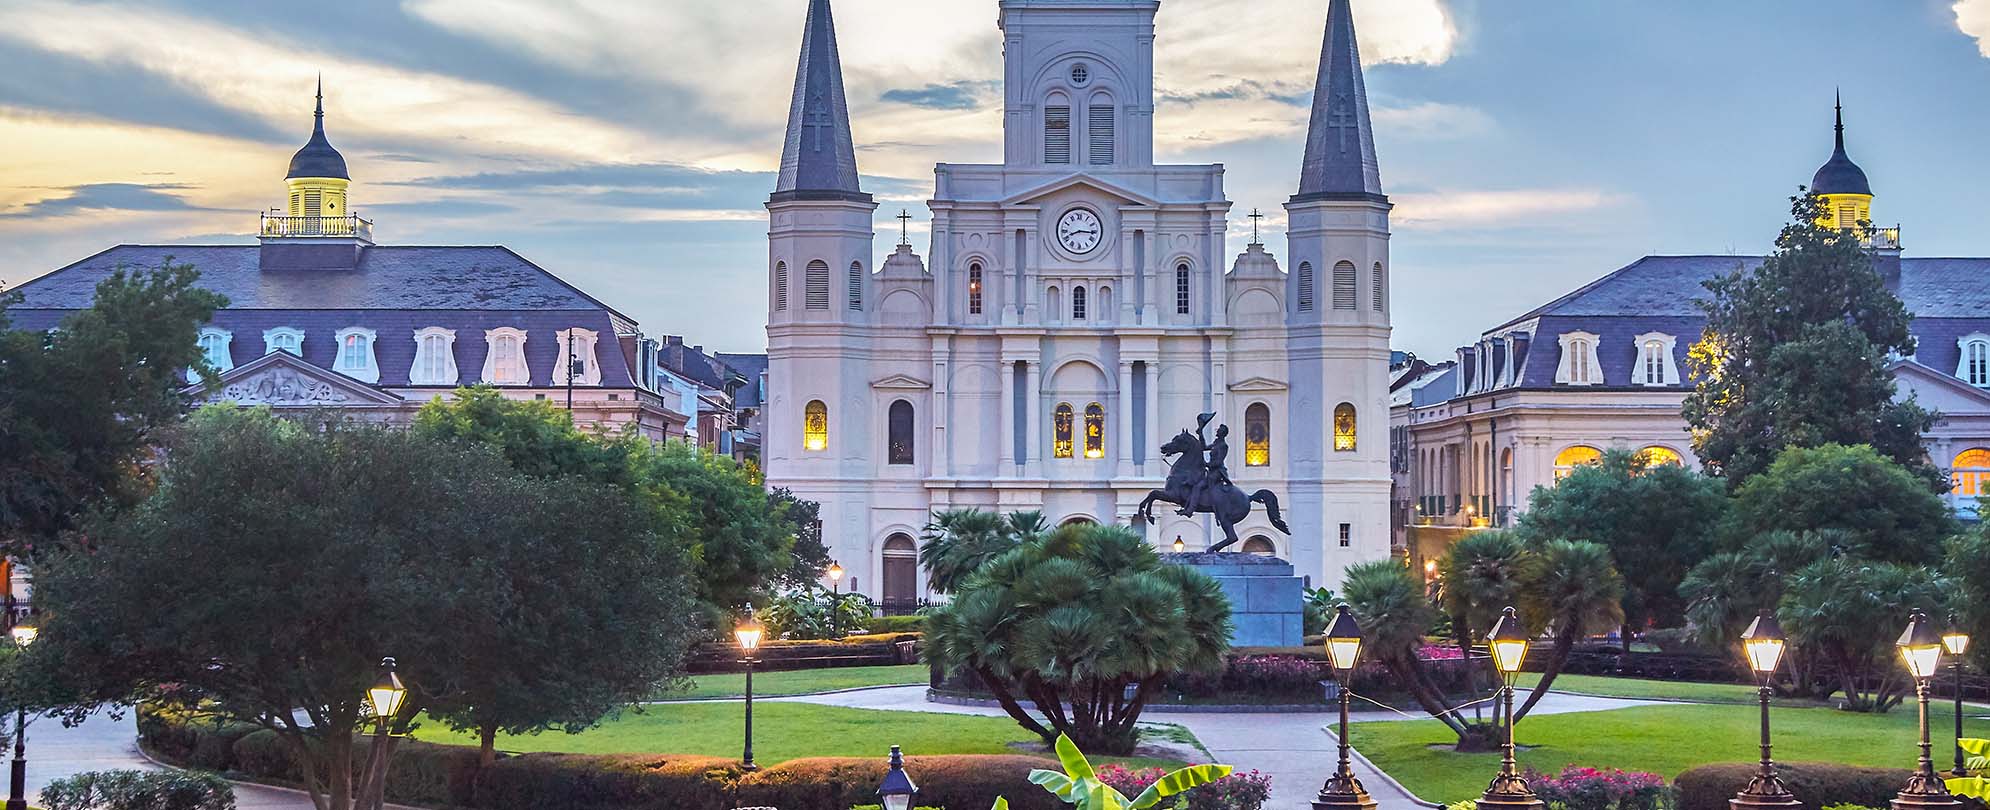 The St. Louis Cathedral in New Orleans, Louisiana. 